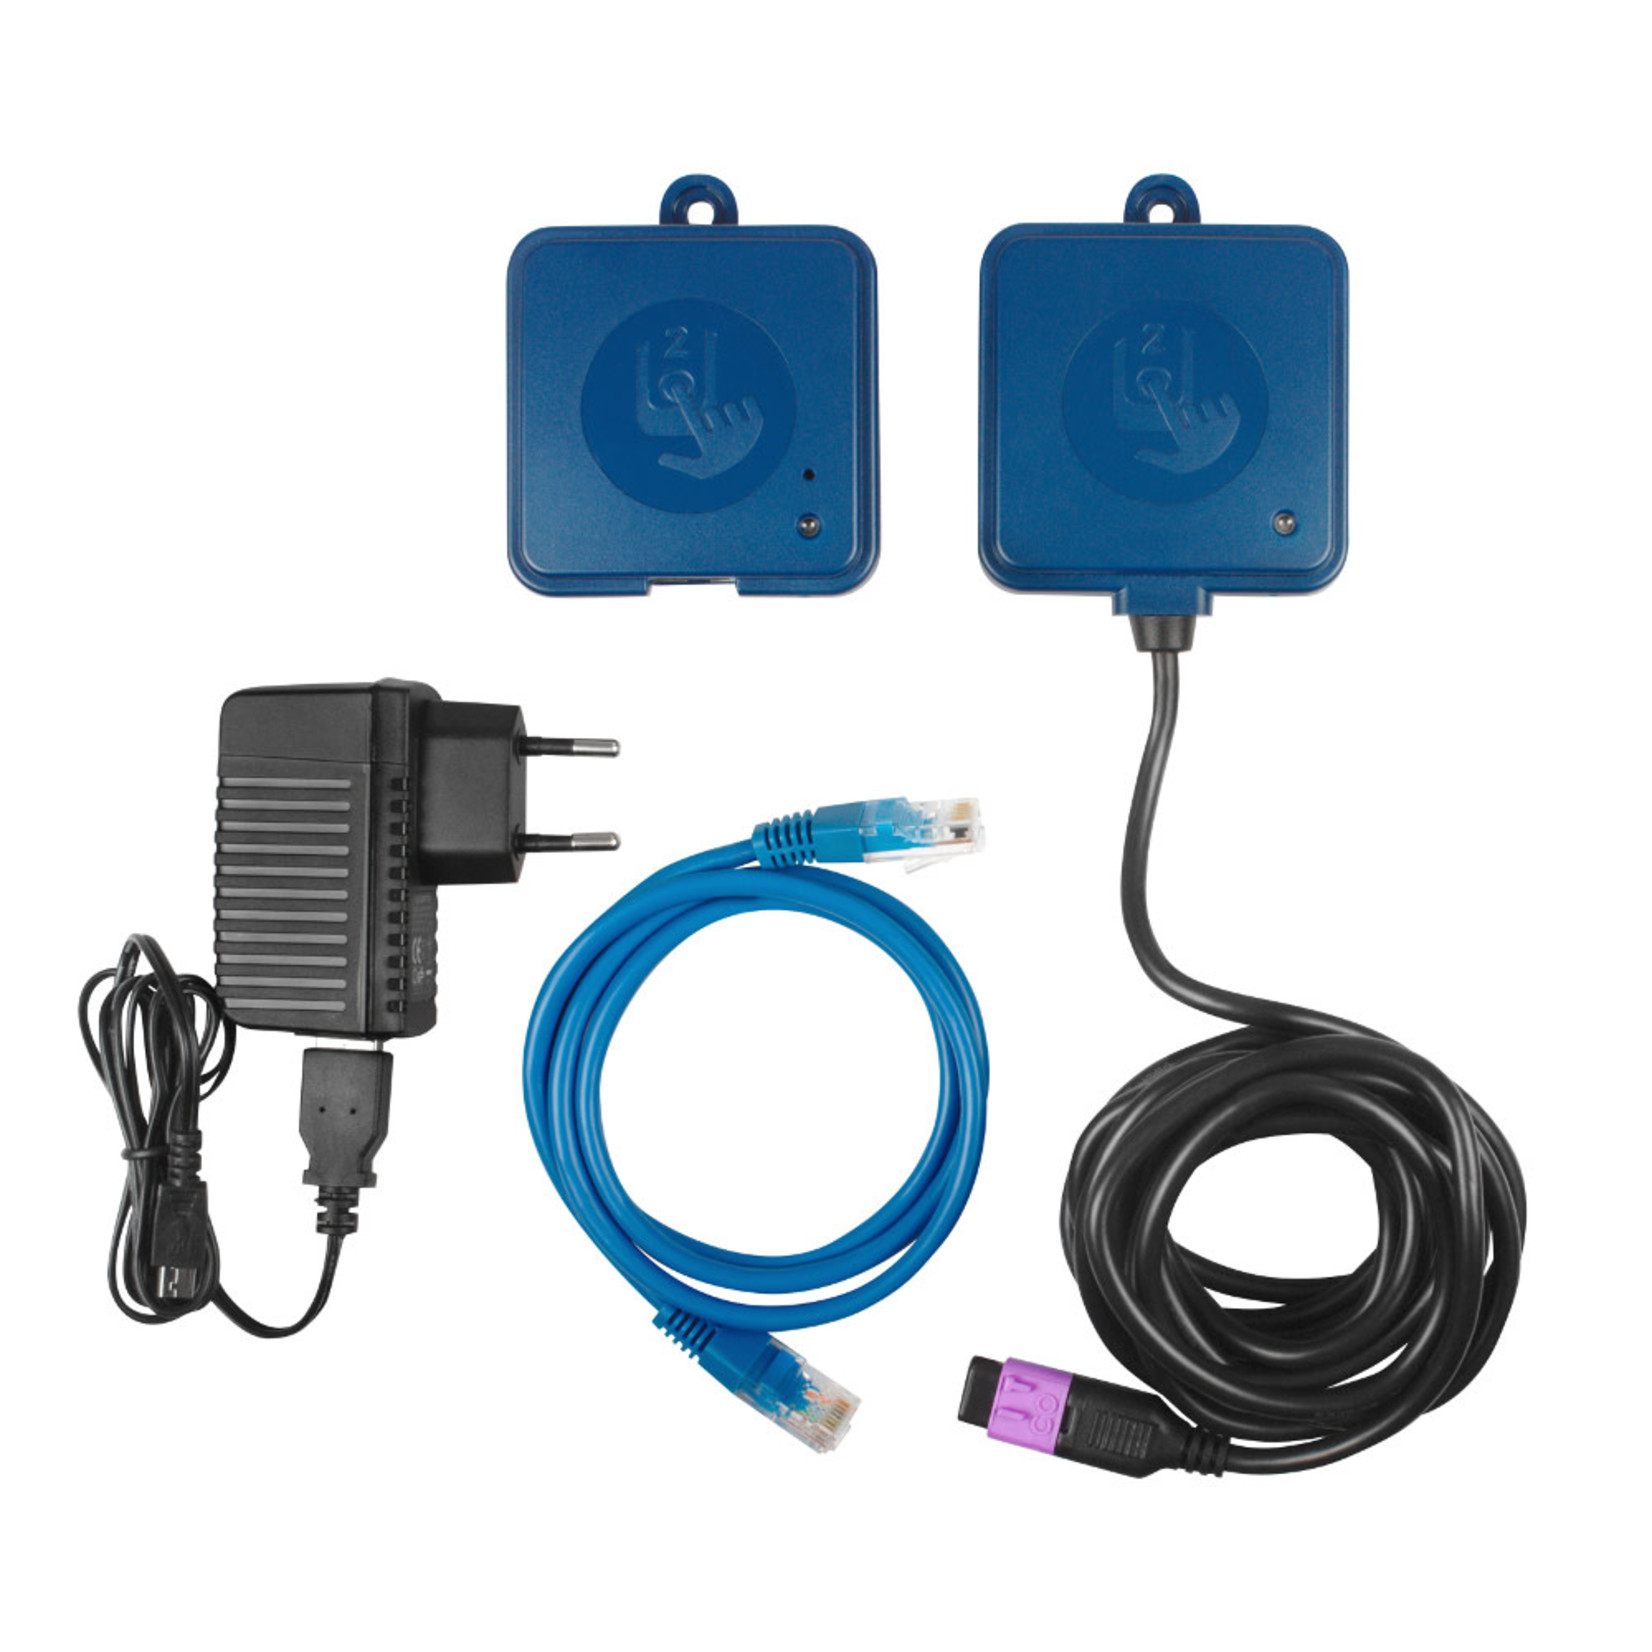 BeWell Spas Canada in.touch 2 Gecko WiFi Module Kit